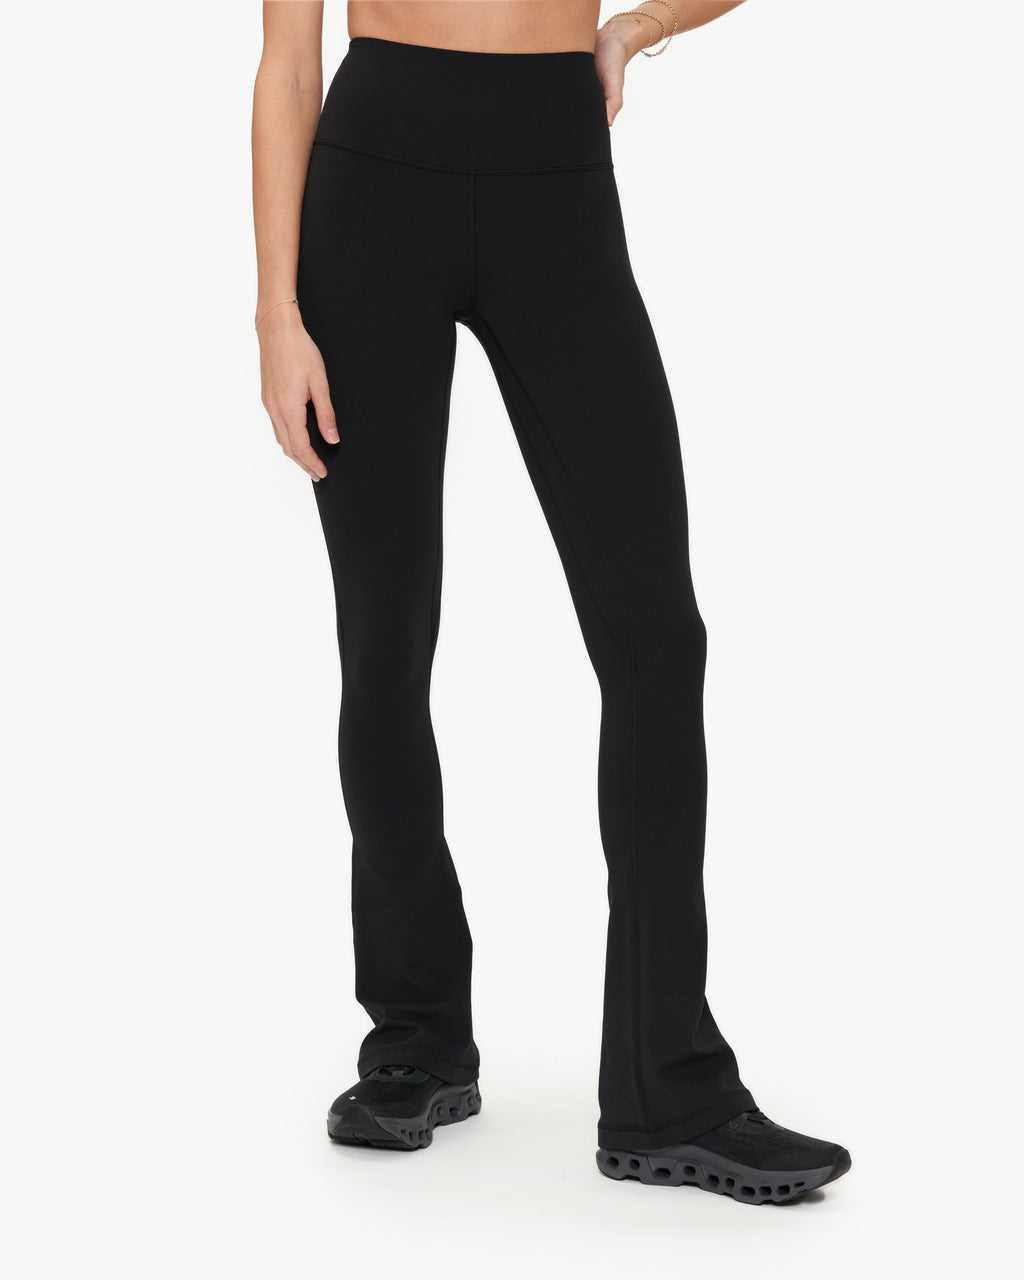 Lululemon Align™ High Rise Pant 25 – The Shop at Equinox